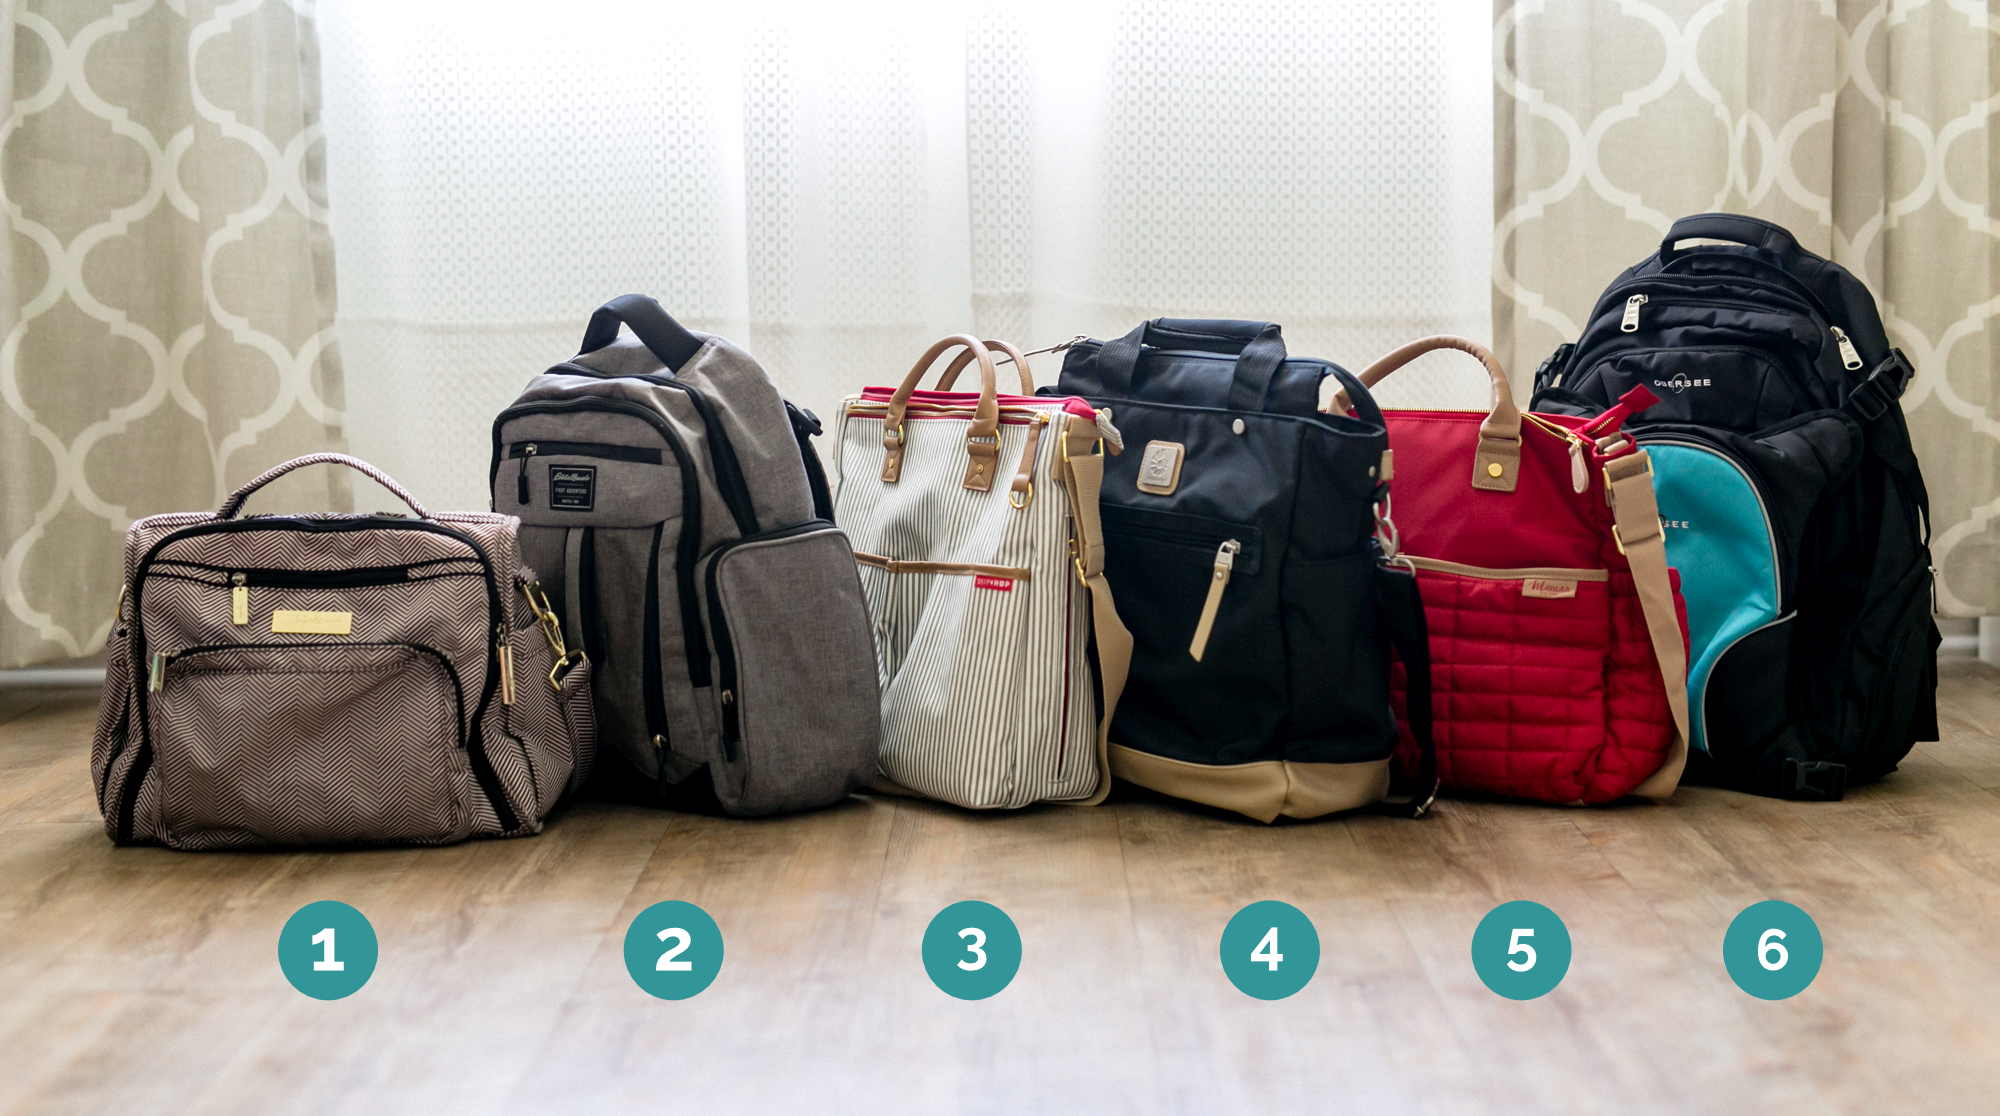 The Unstoppable Diaper Bag